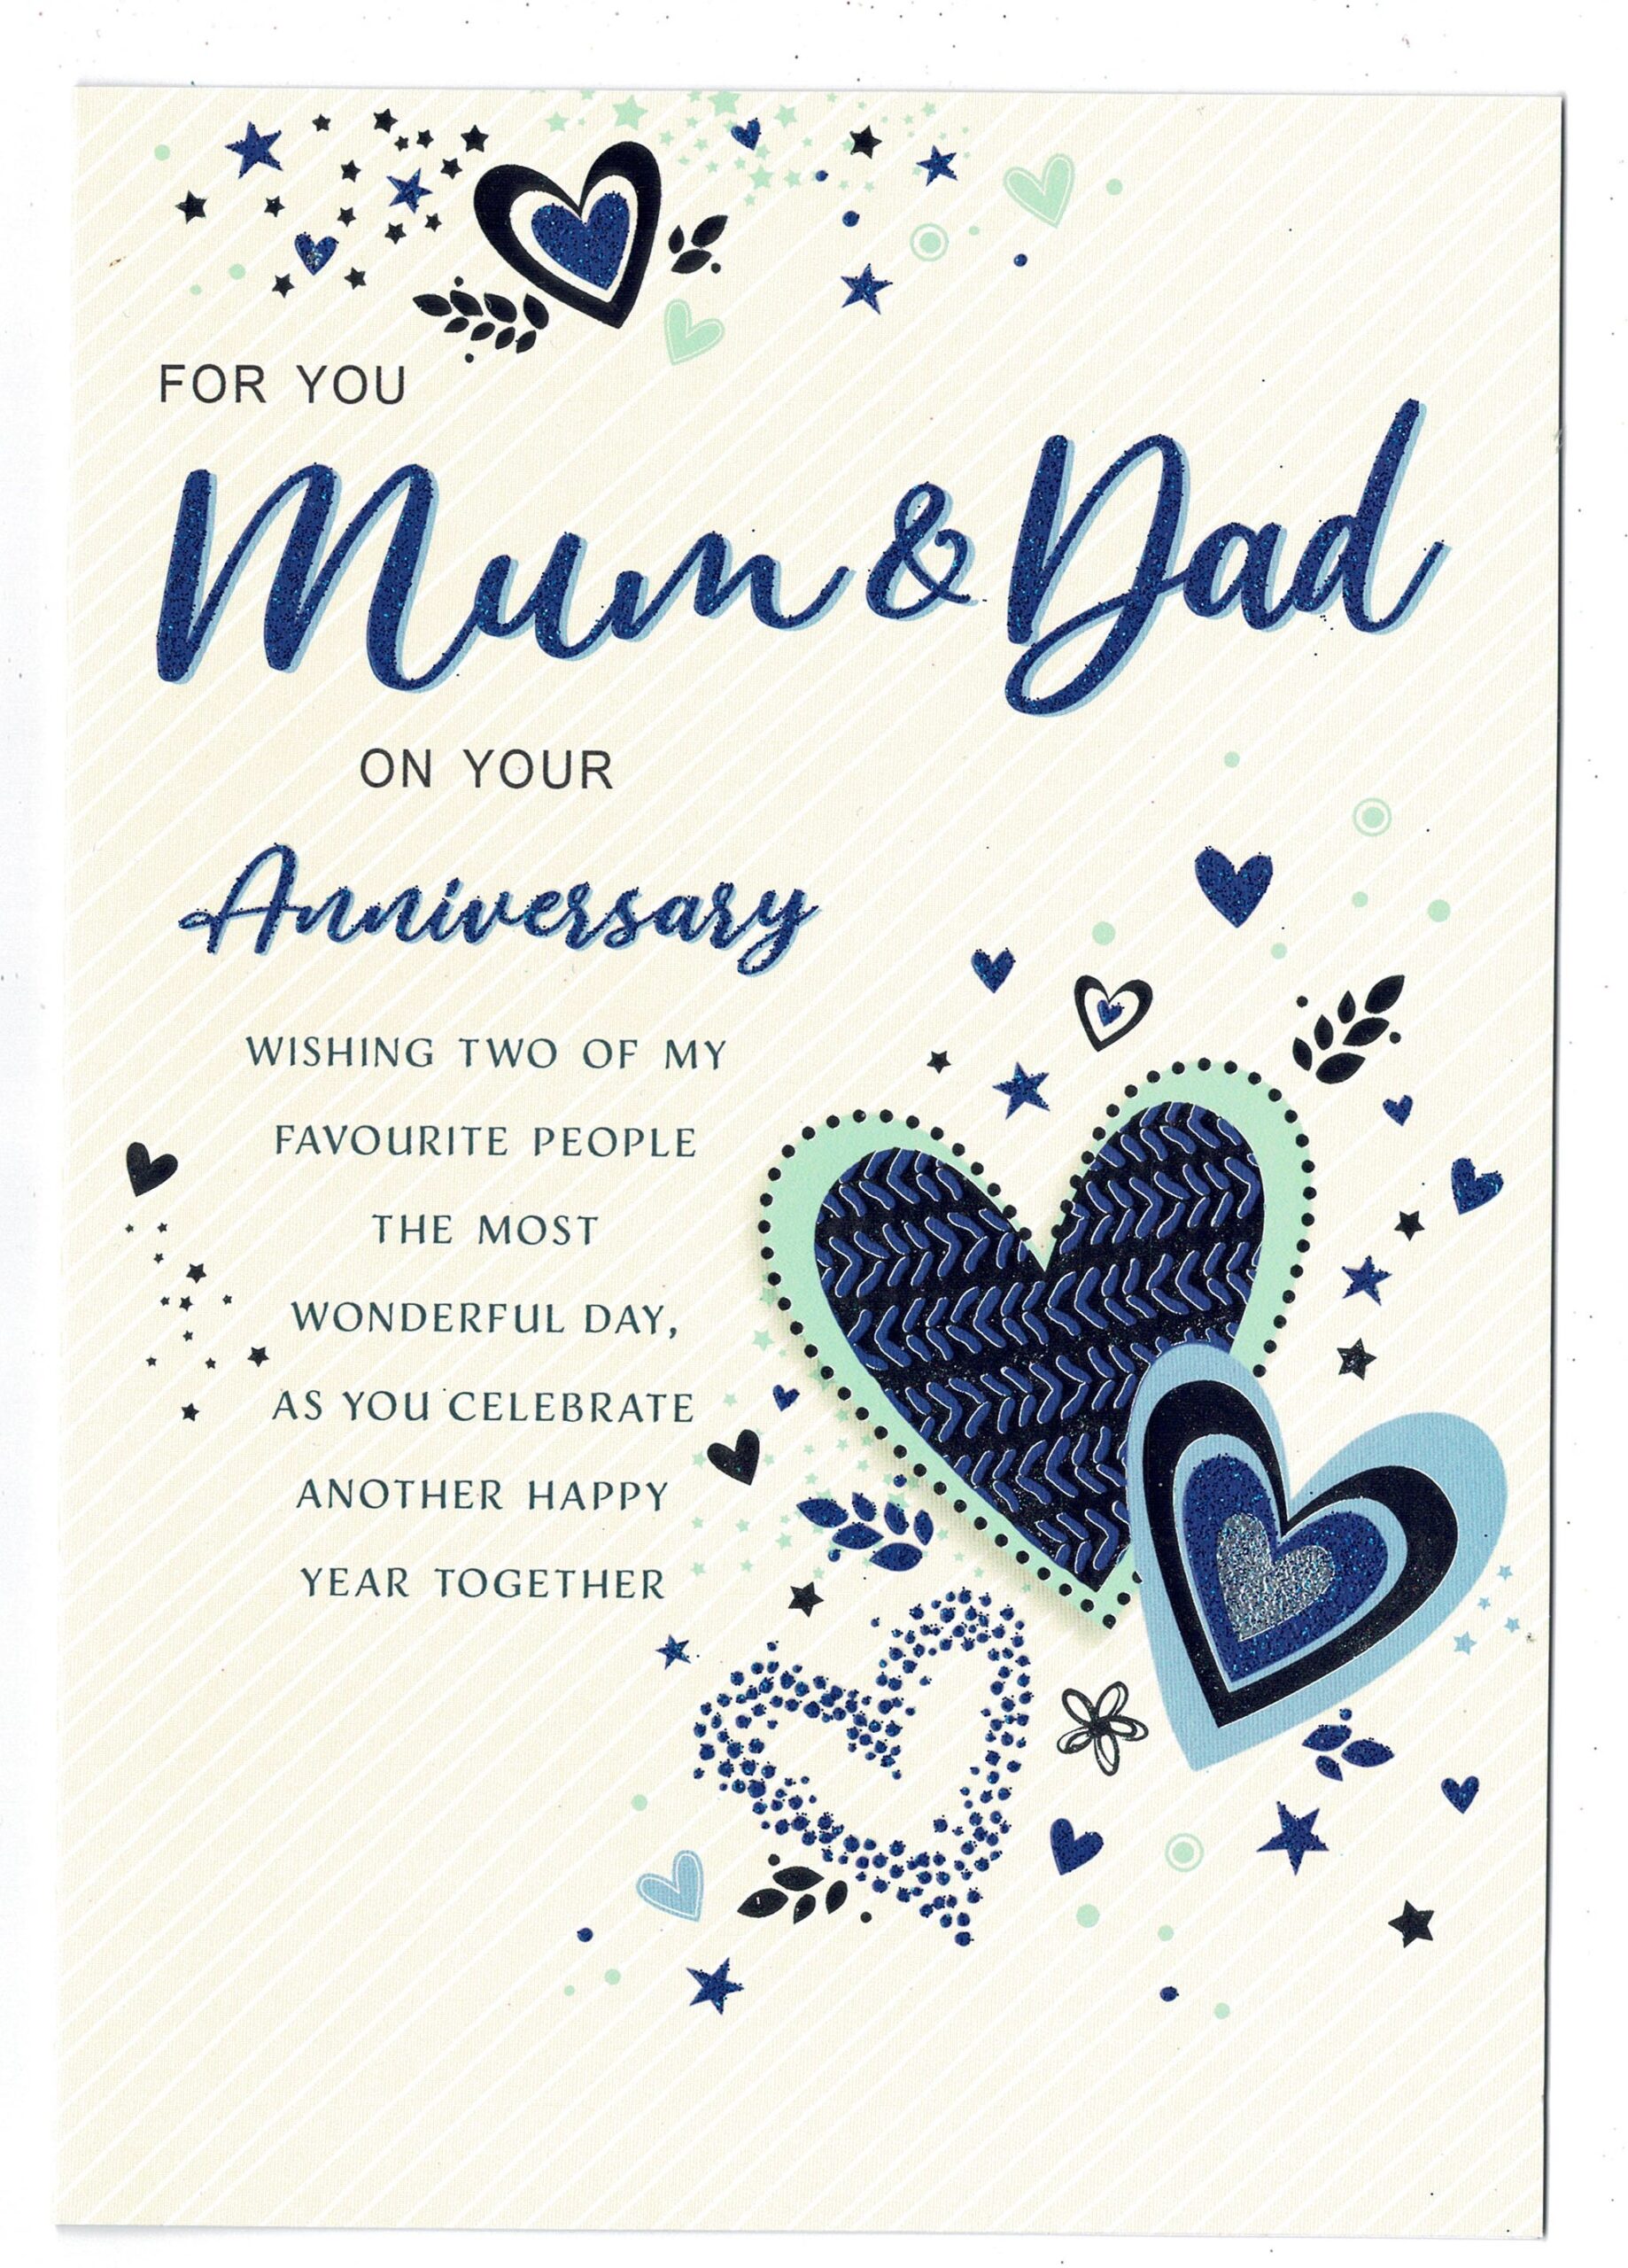 Greeting Cards With Love Mum And Dad Ruby Wedding Anniversary Card lovely  Verse 